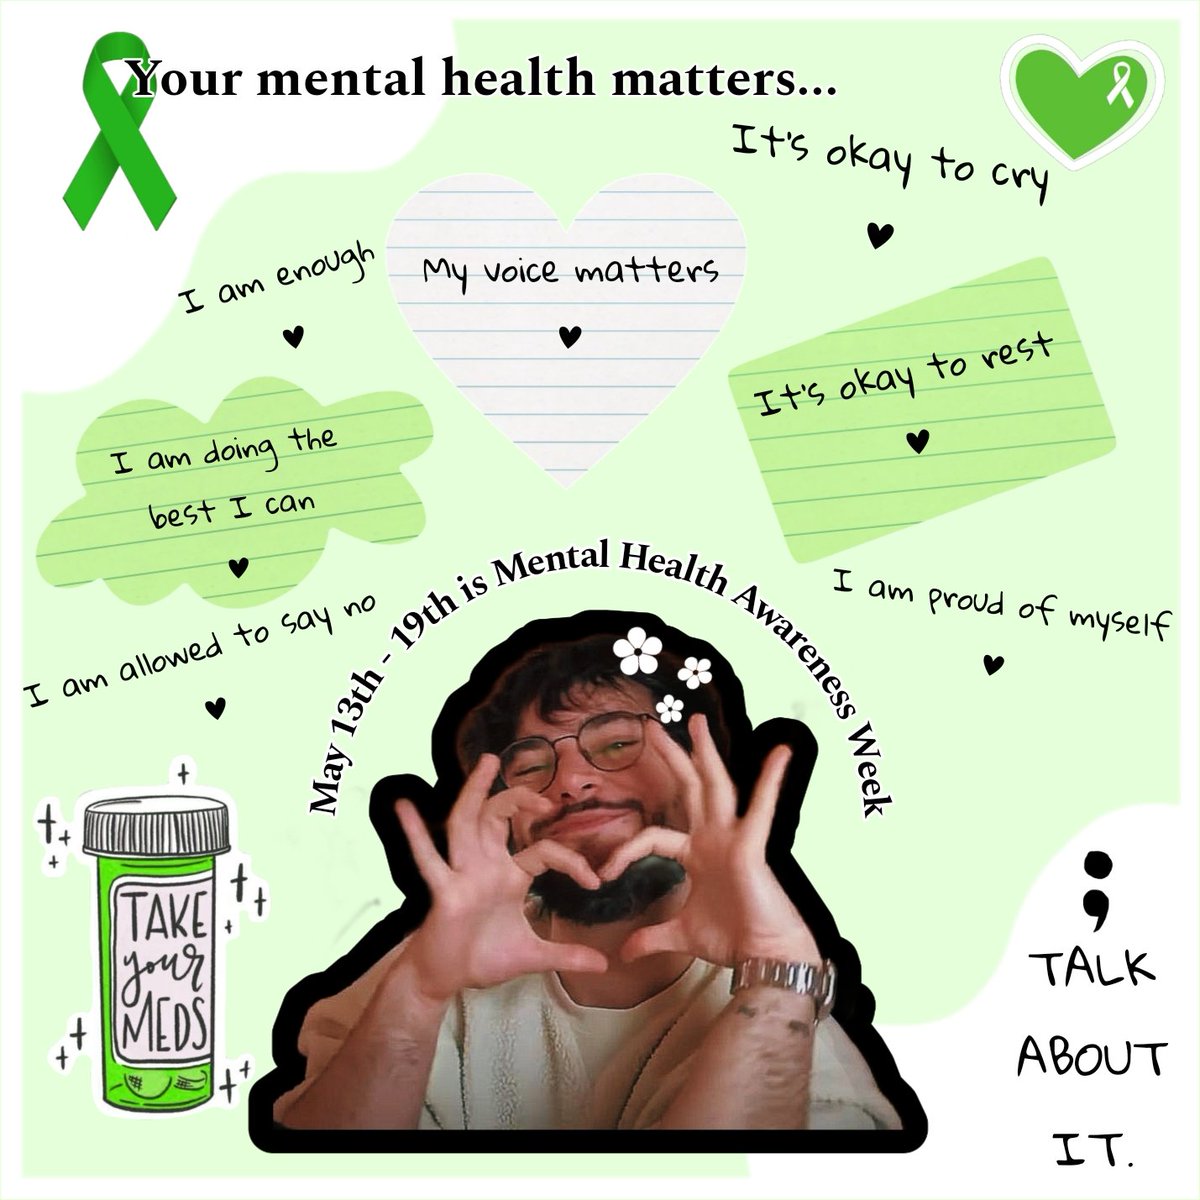 As somebody with severe mental health issues, I can't express this enough...

TALK. 

You can get through this- whatever you're going through at the moment. I believe in you.

♡

#jimbotwt #mazzatwt #MentalHealthAwarenessWeek #mentalhealth #awareness #jamesmarriott